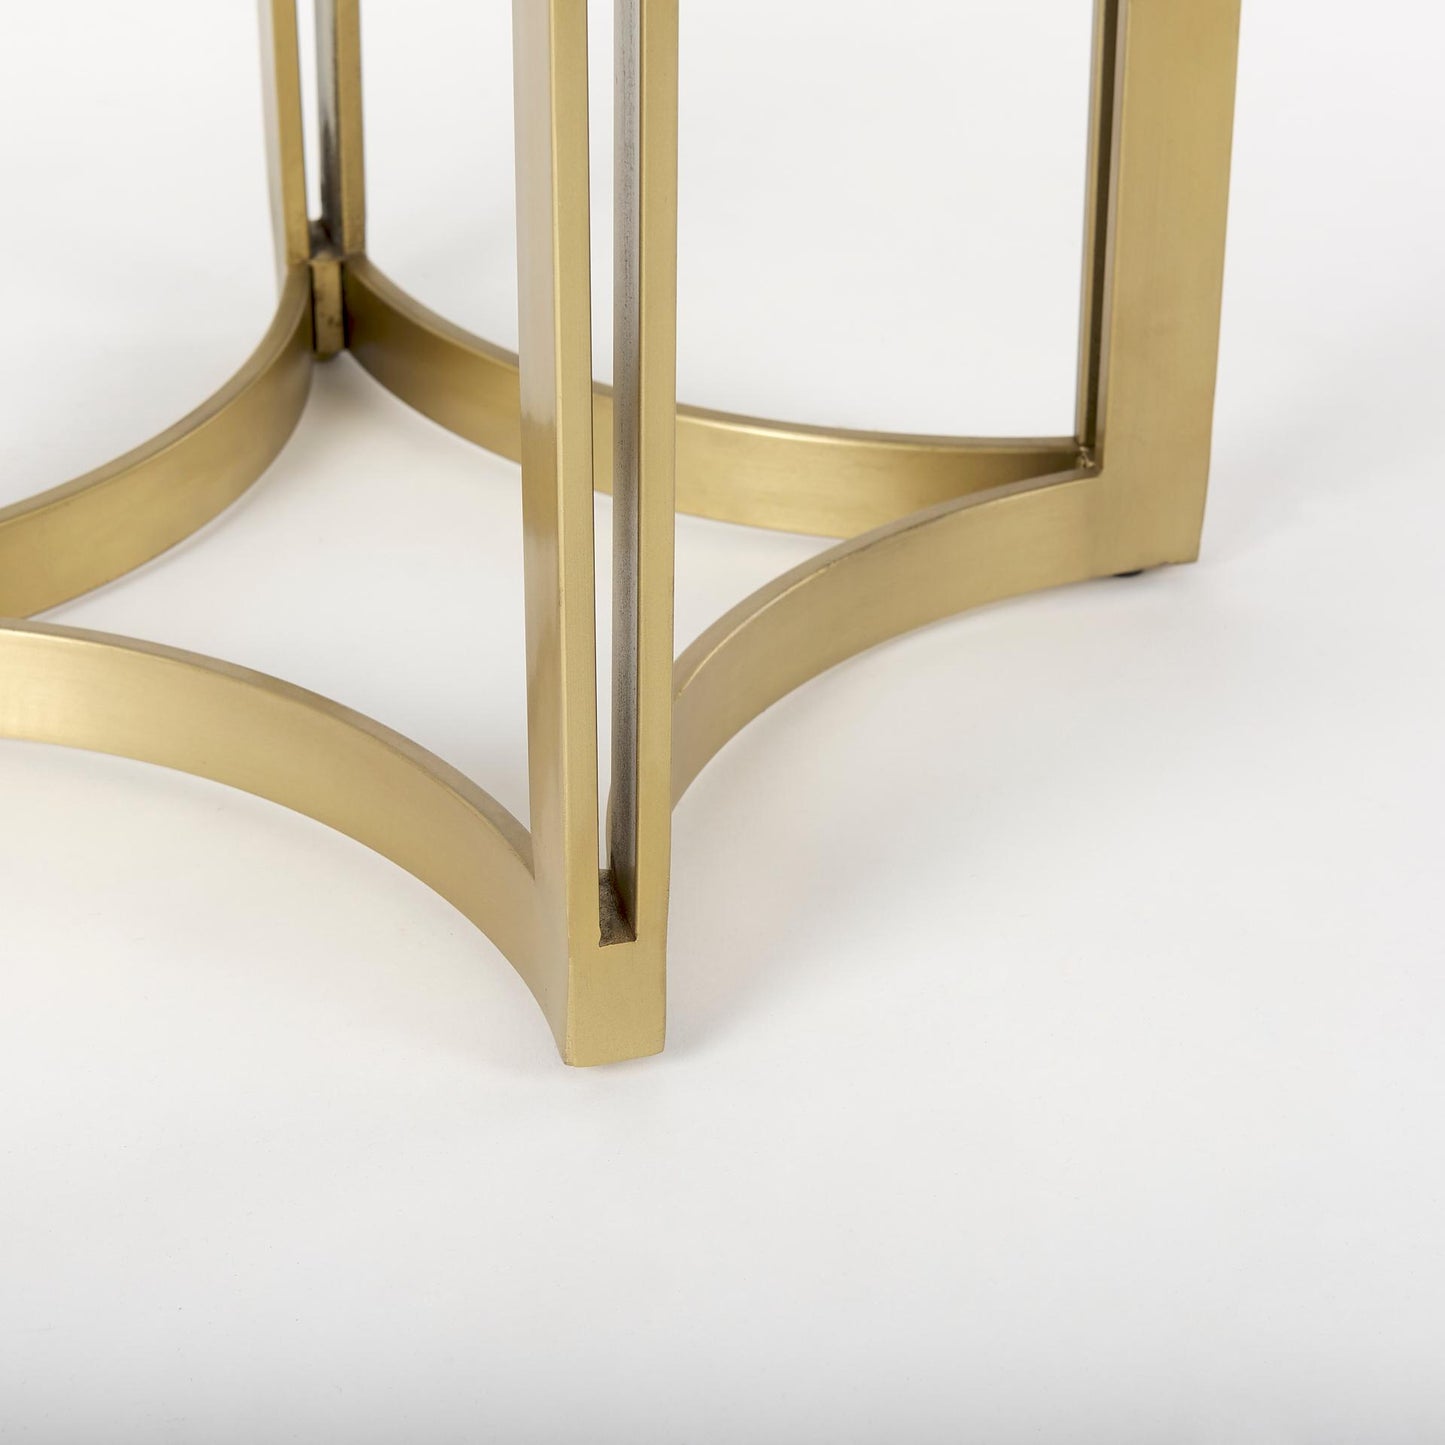 Tanner Marble & Gold Metal Bistro Table